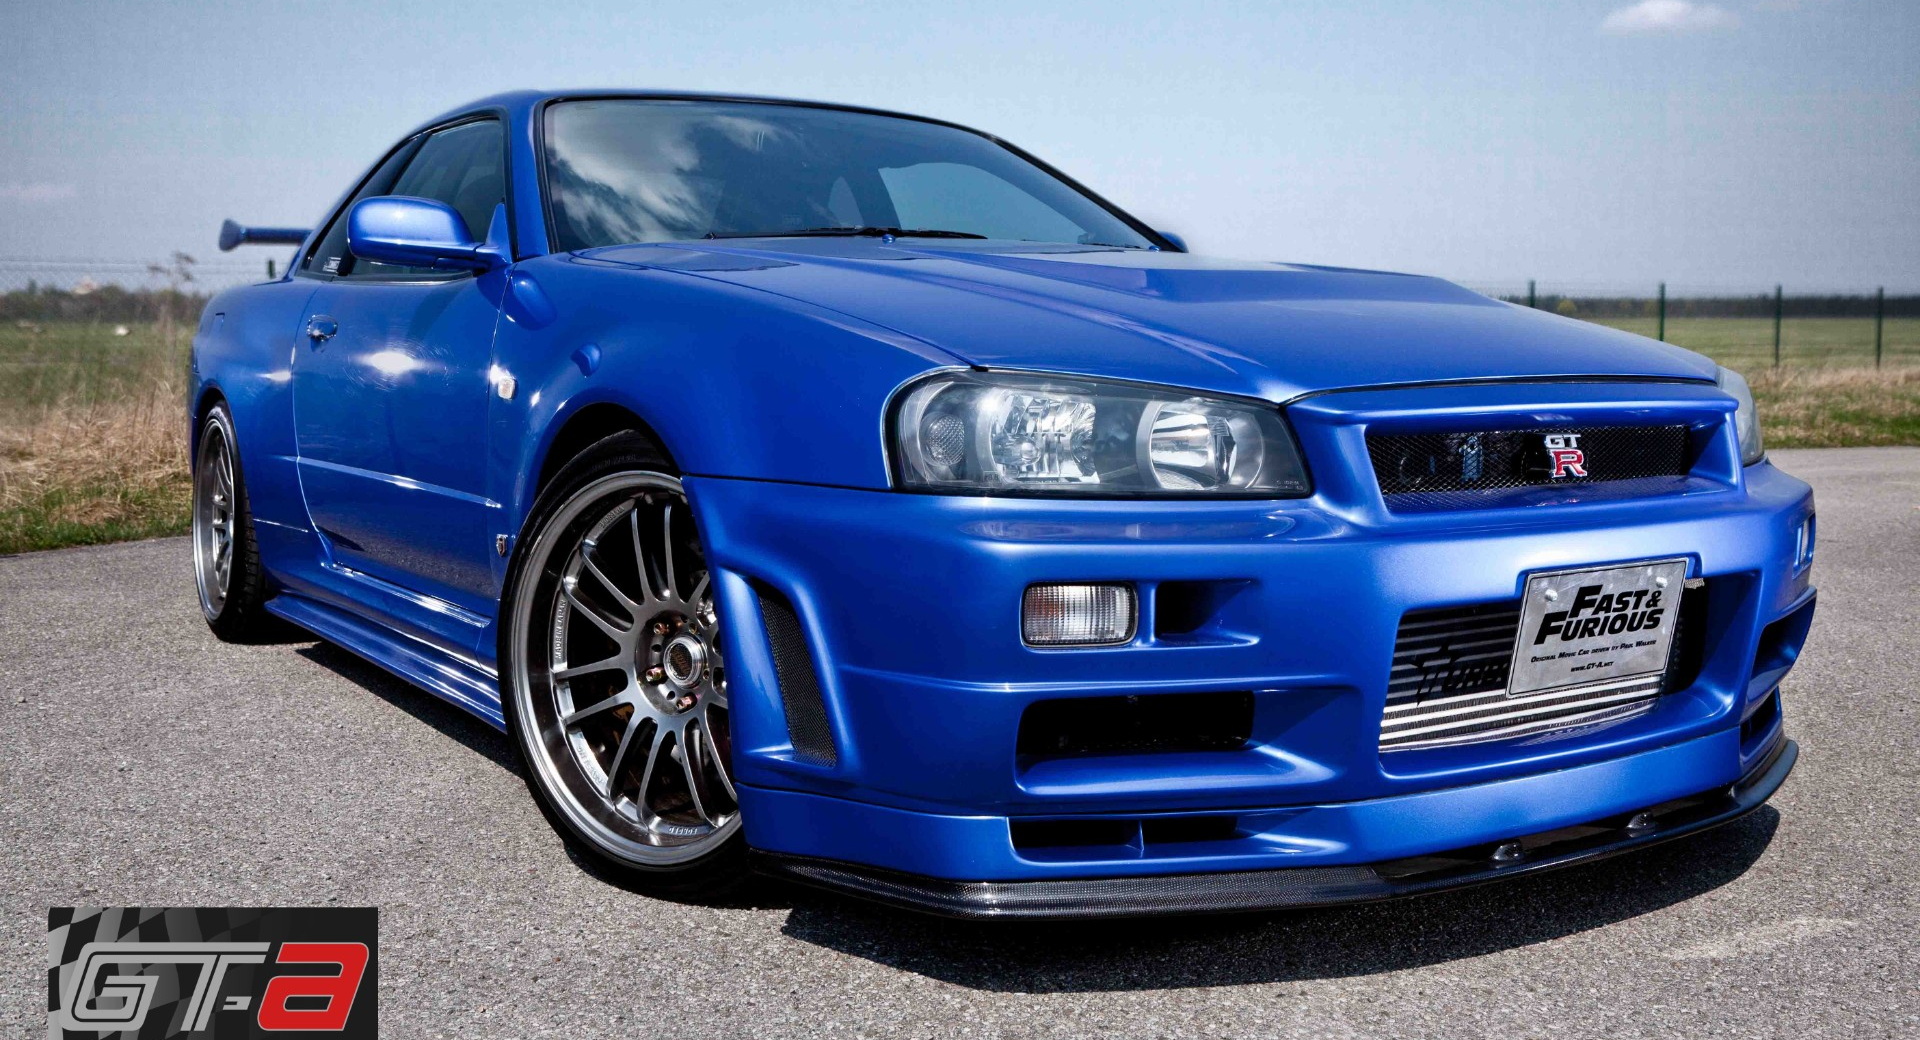 Fast and Furious' Nissan Skyline GT-R up for auction - Drive